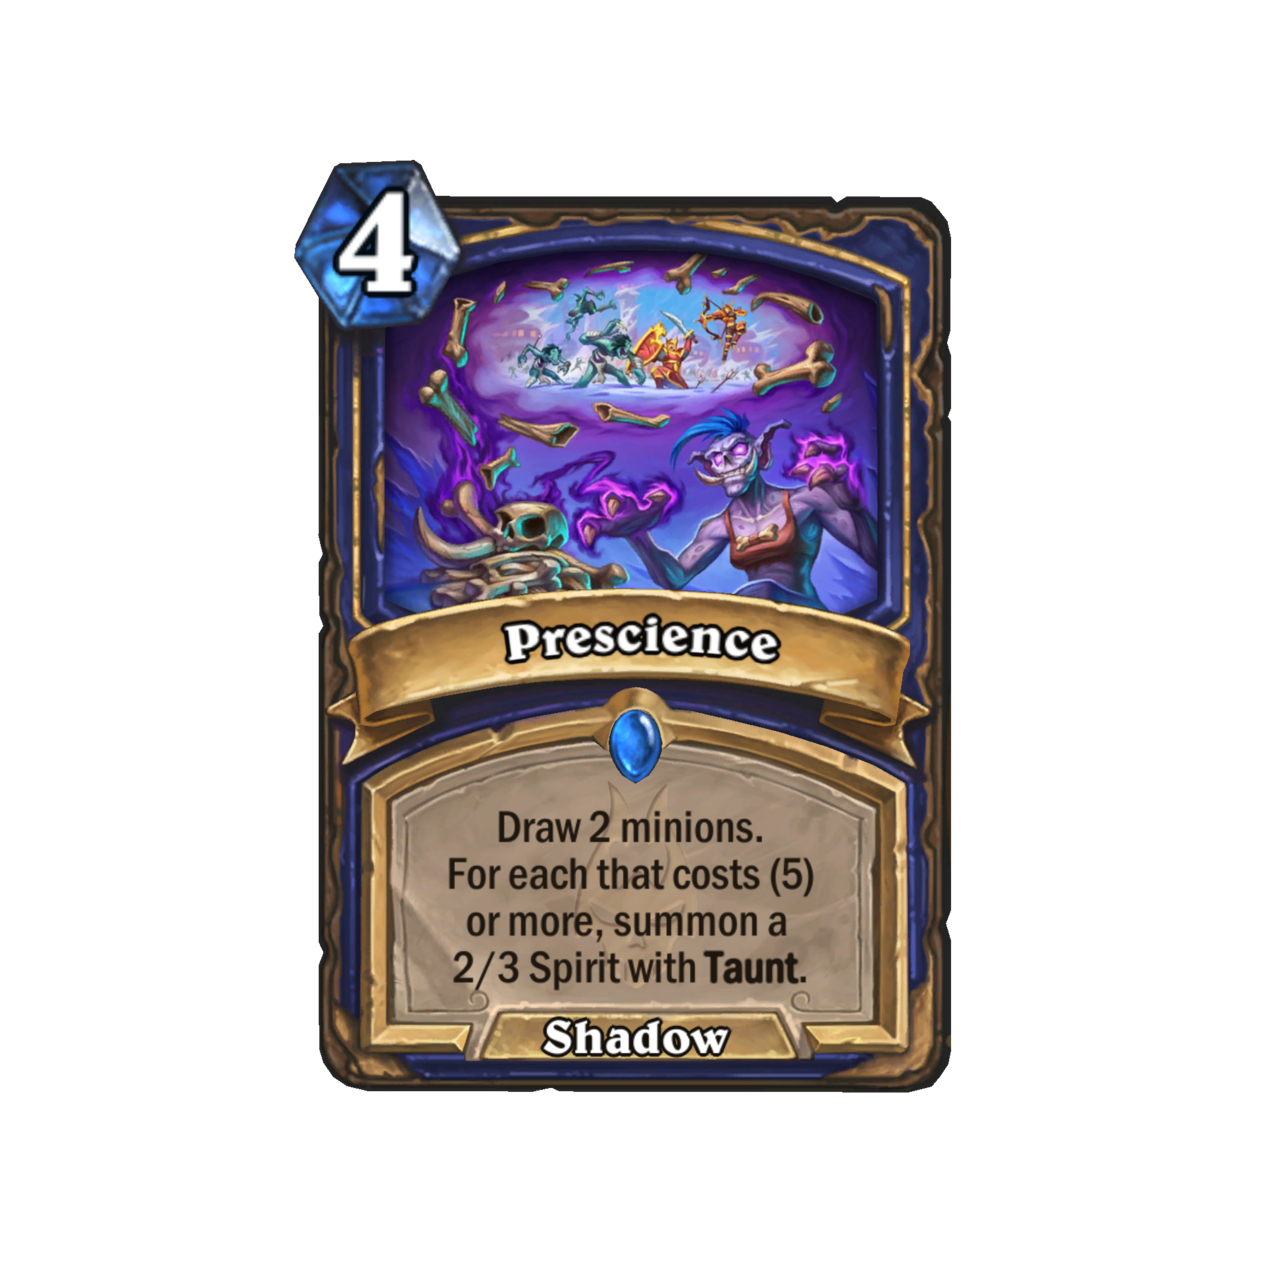 Prescience (4) - Draw 2 minions. For each that costs (5) or more, summon a 2/3 Spirit with Taunt.